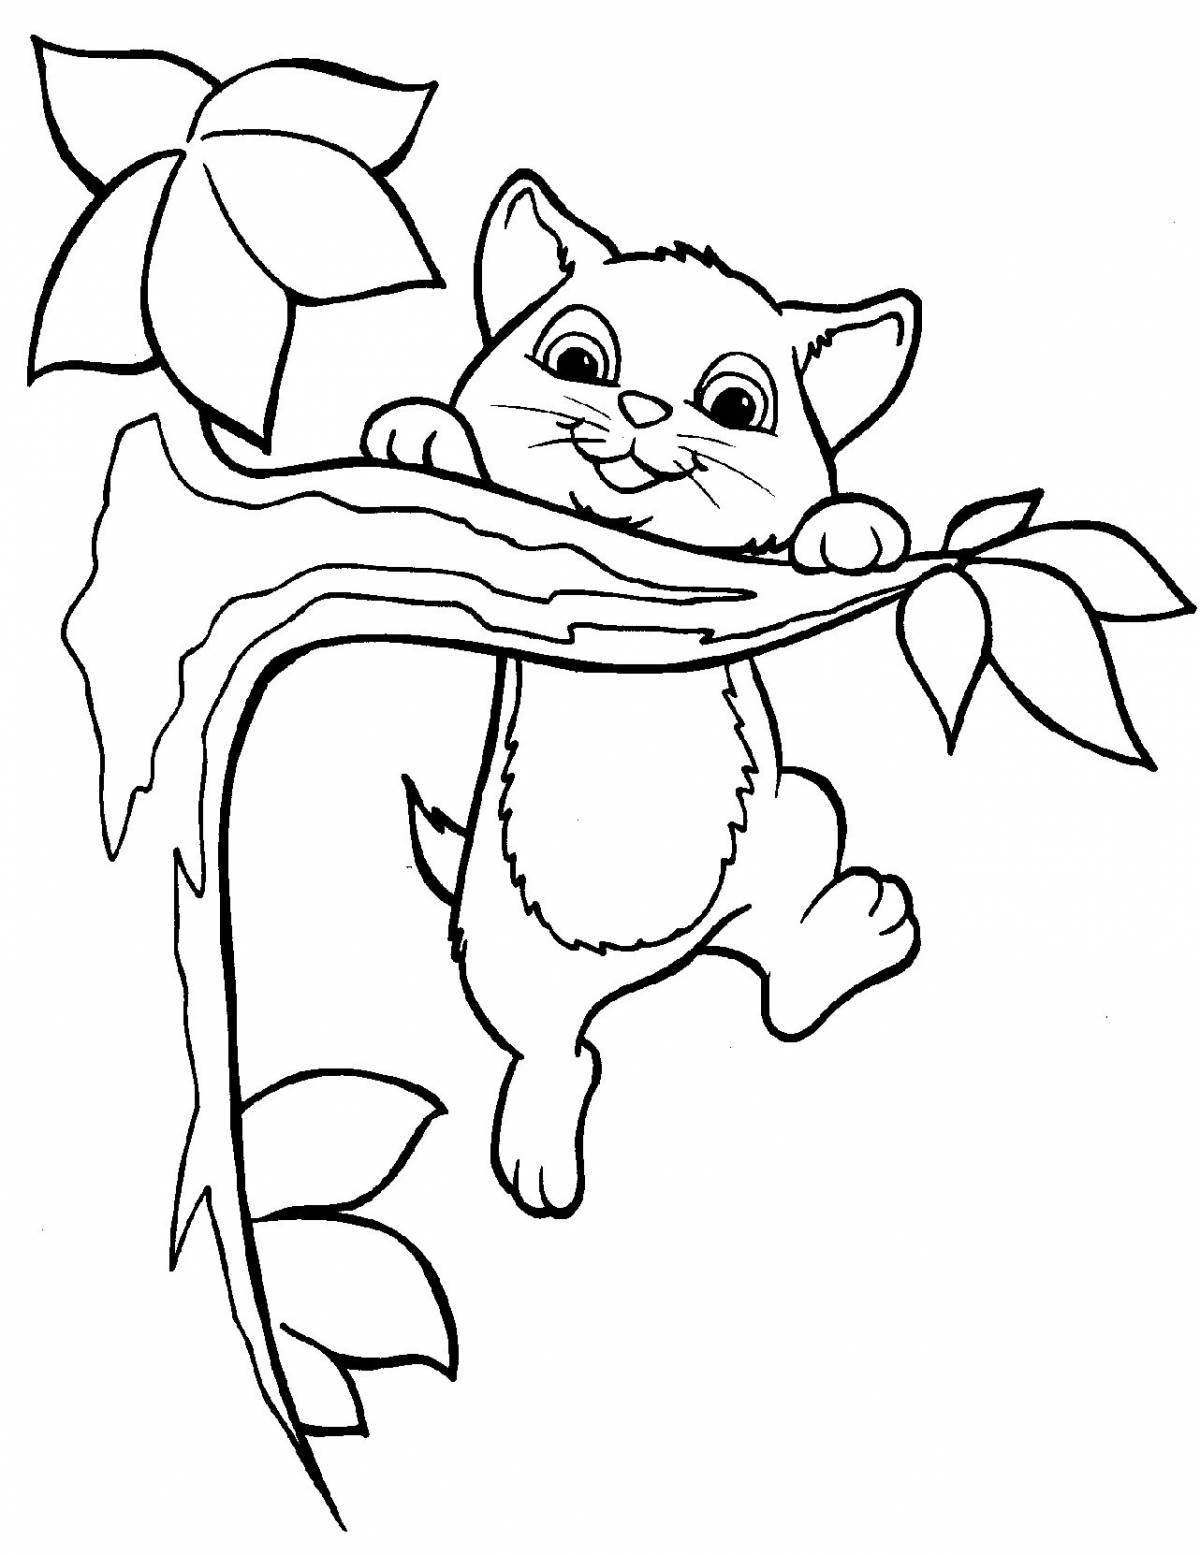 Amazing coloring book for girls, cats and kittens